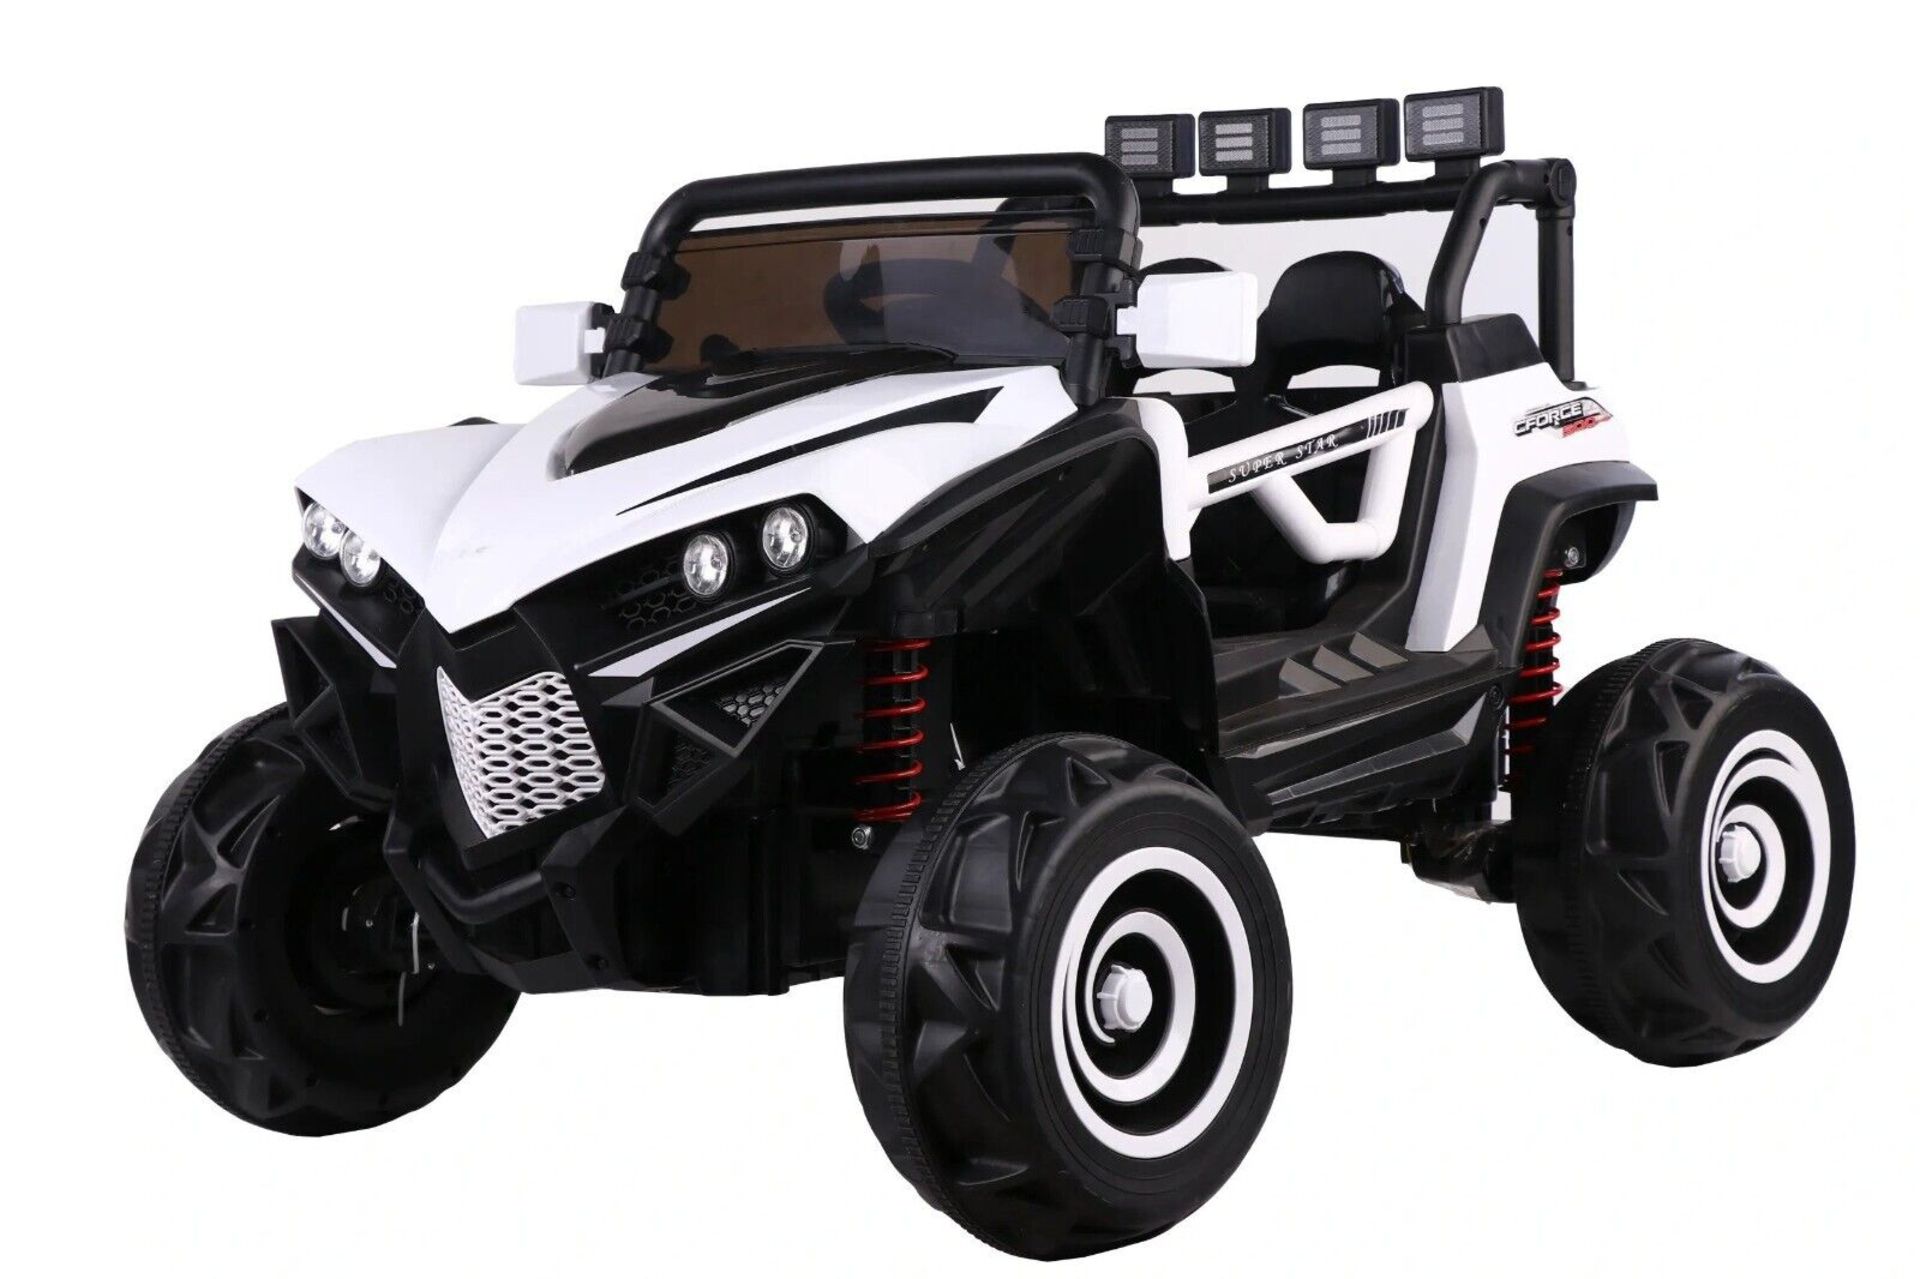 5 X BRAND NEW WHITE 4X4 ATV/UTV KIDS BUGGY JEEP ELECTRIC CAR WITH REMOTE BRAND NEW BOXED